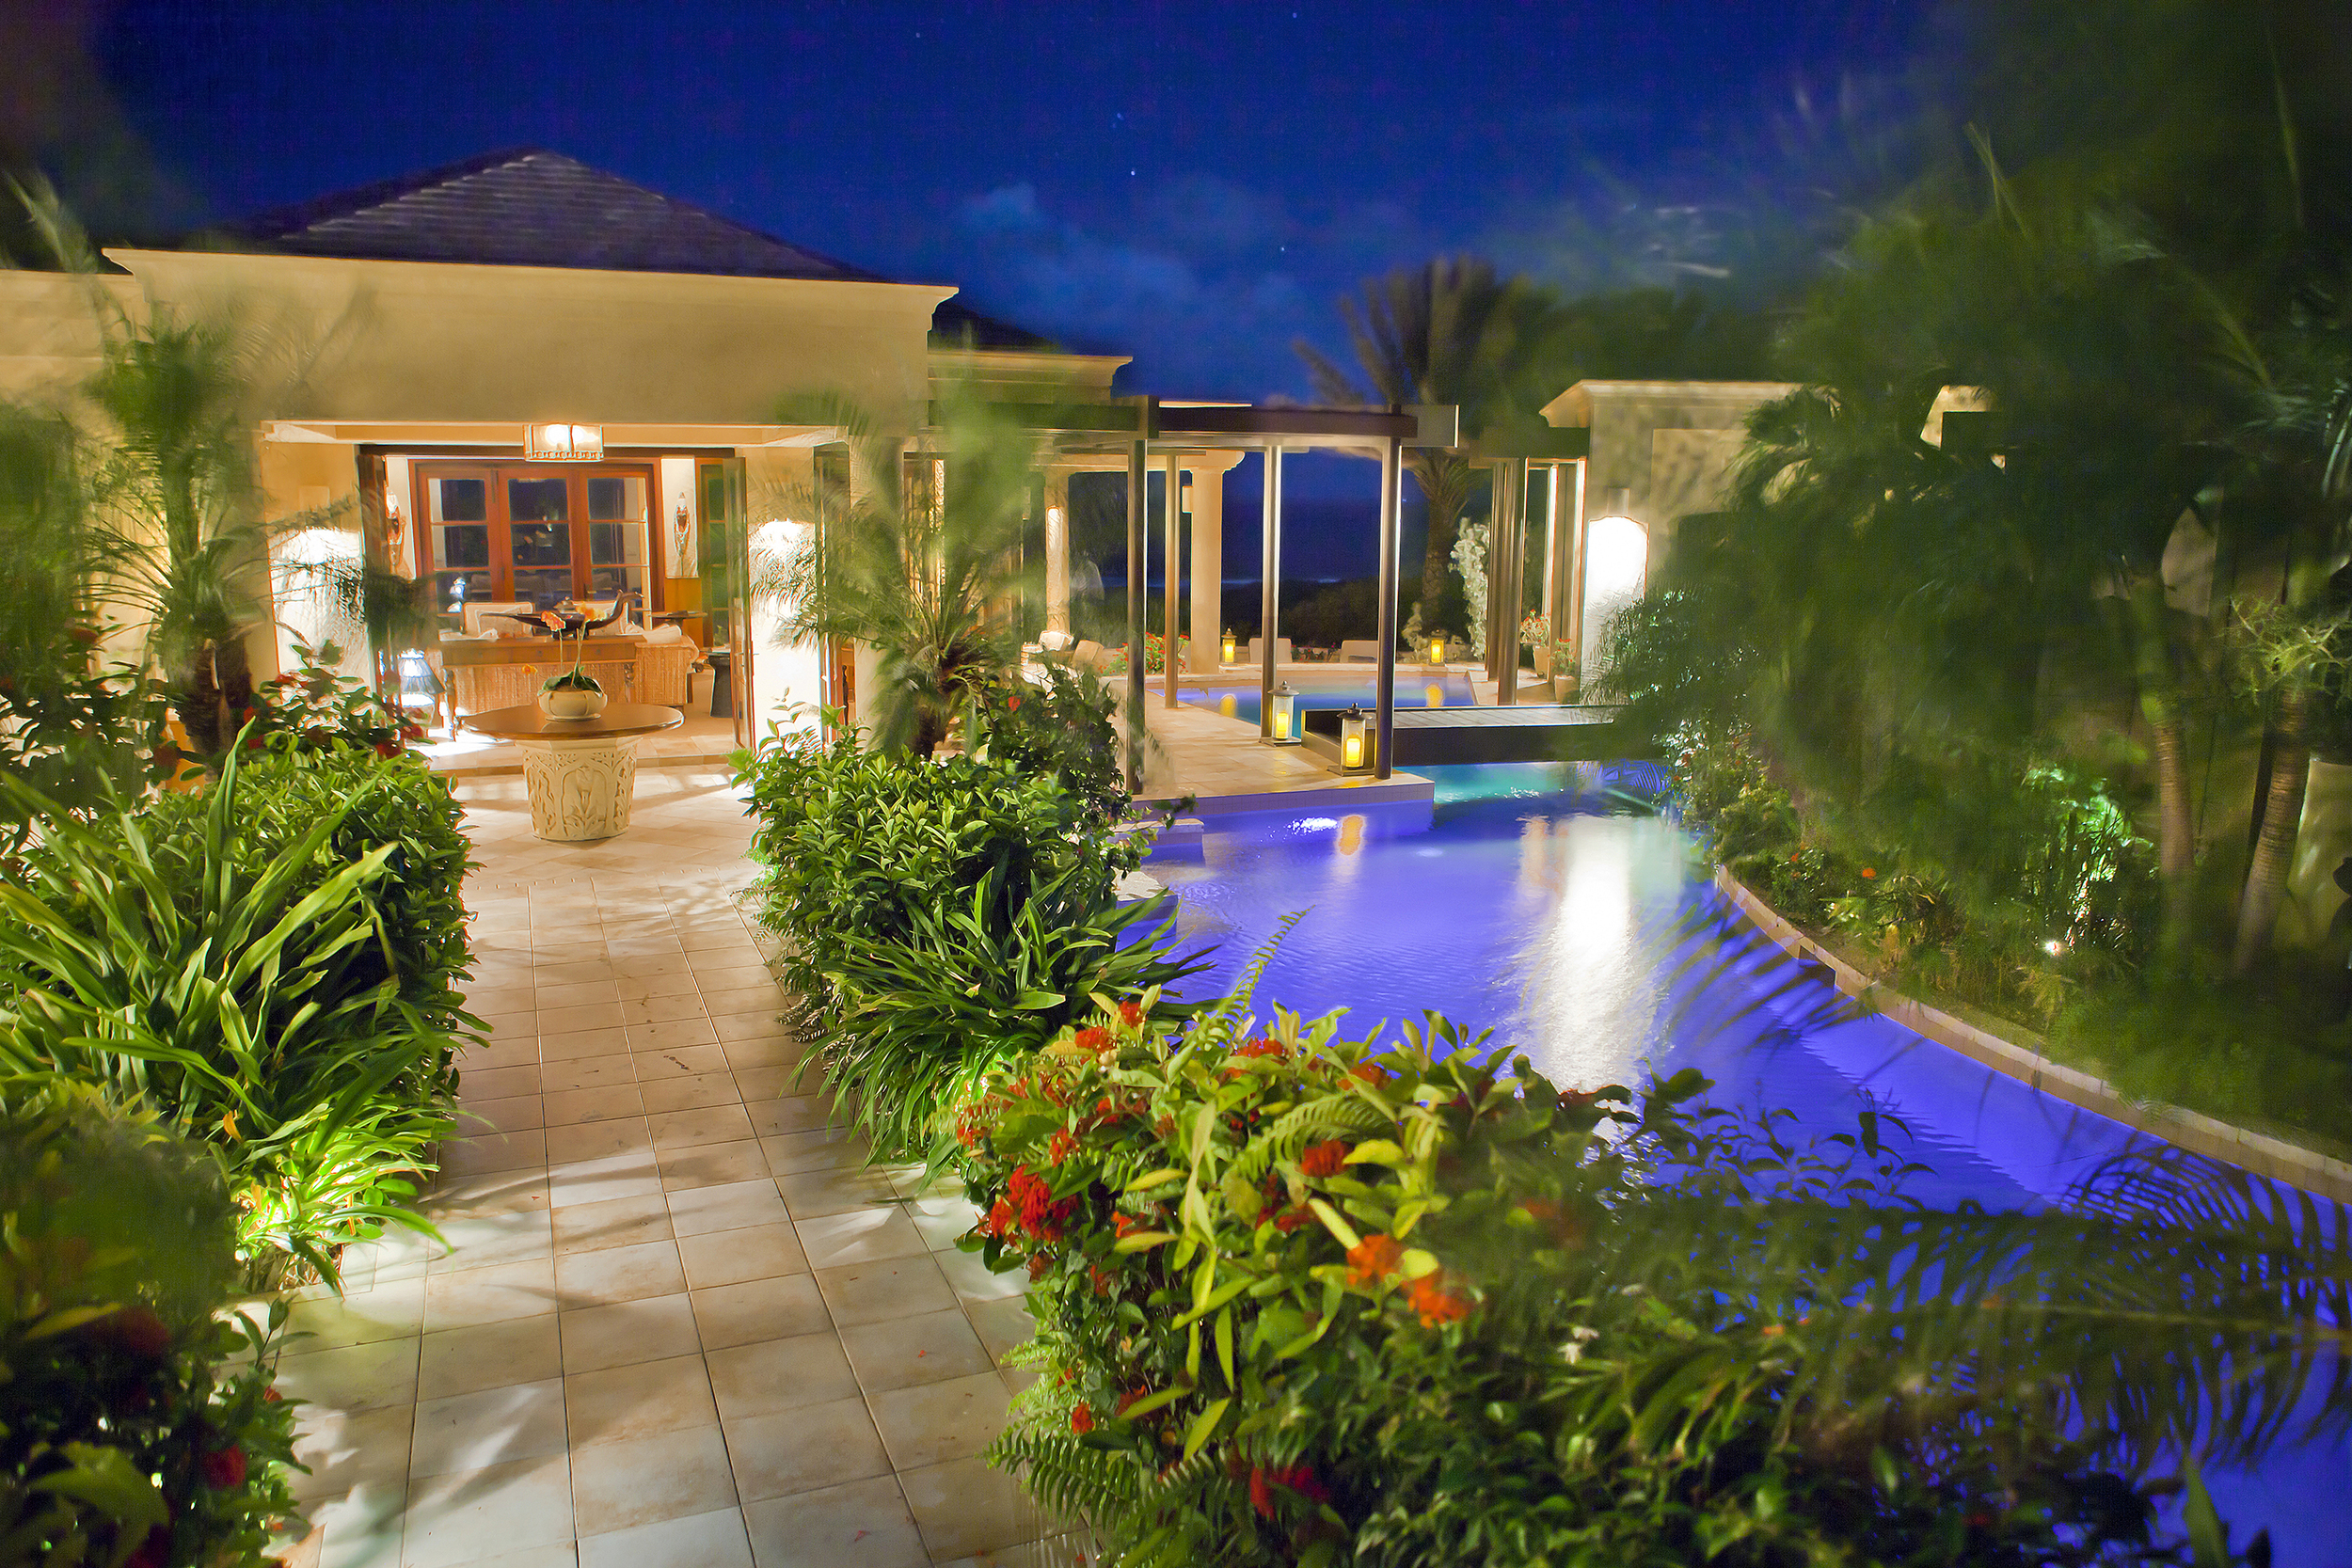  LED lights allow you set the&nbsp;mood by changing the color of the pool lights or set different light shows. 